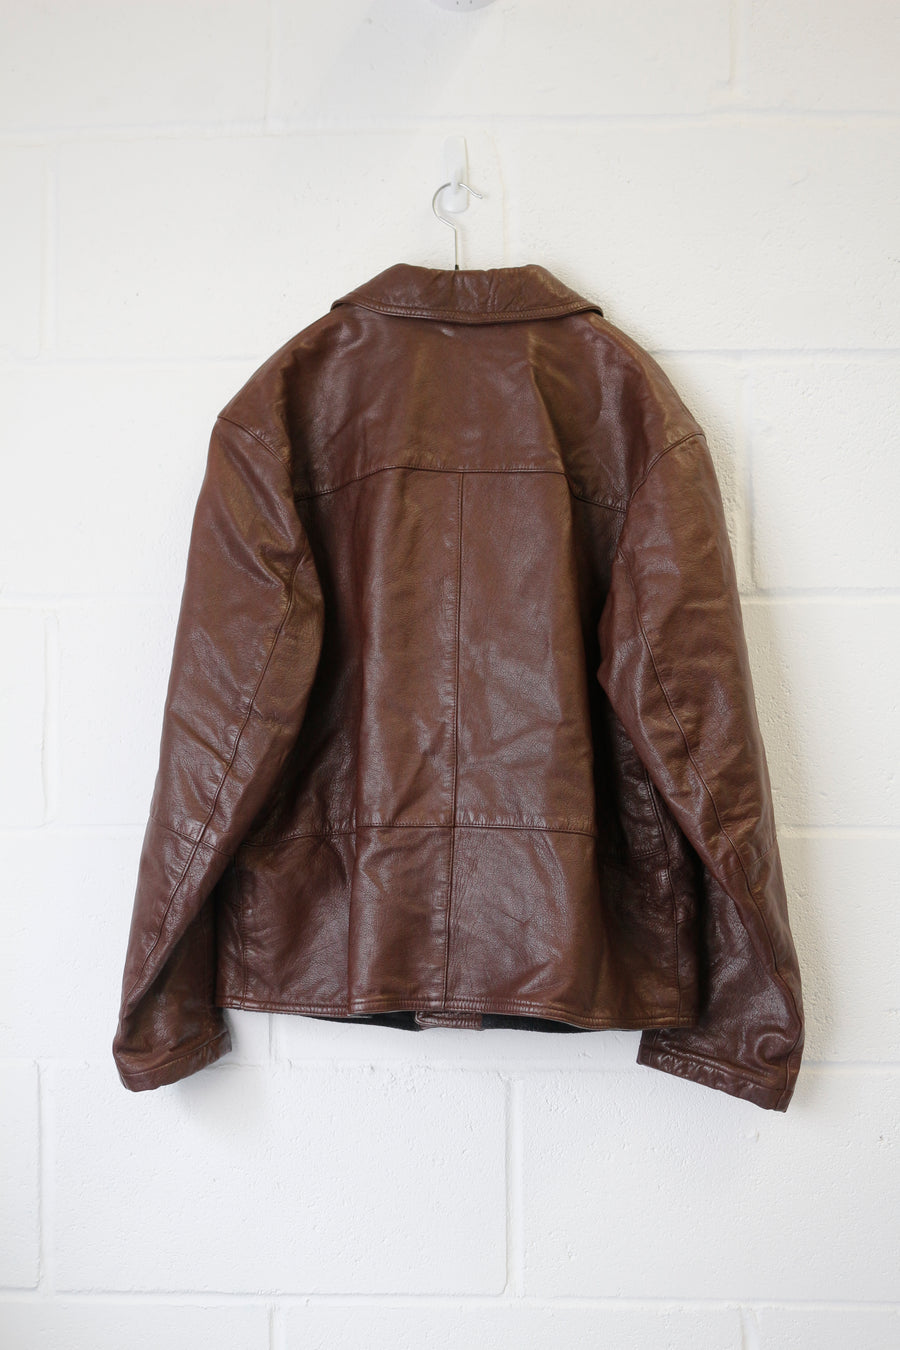 (L) Emporio Armani AW1995 Panelled Goat Leather Blouson with Slit Pockets and Fleece Lining